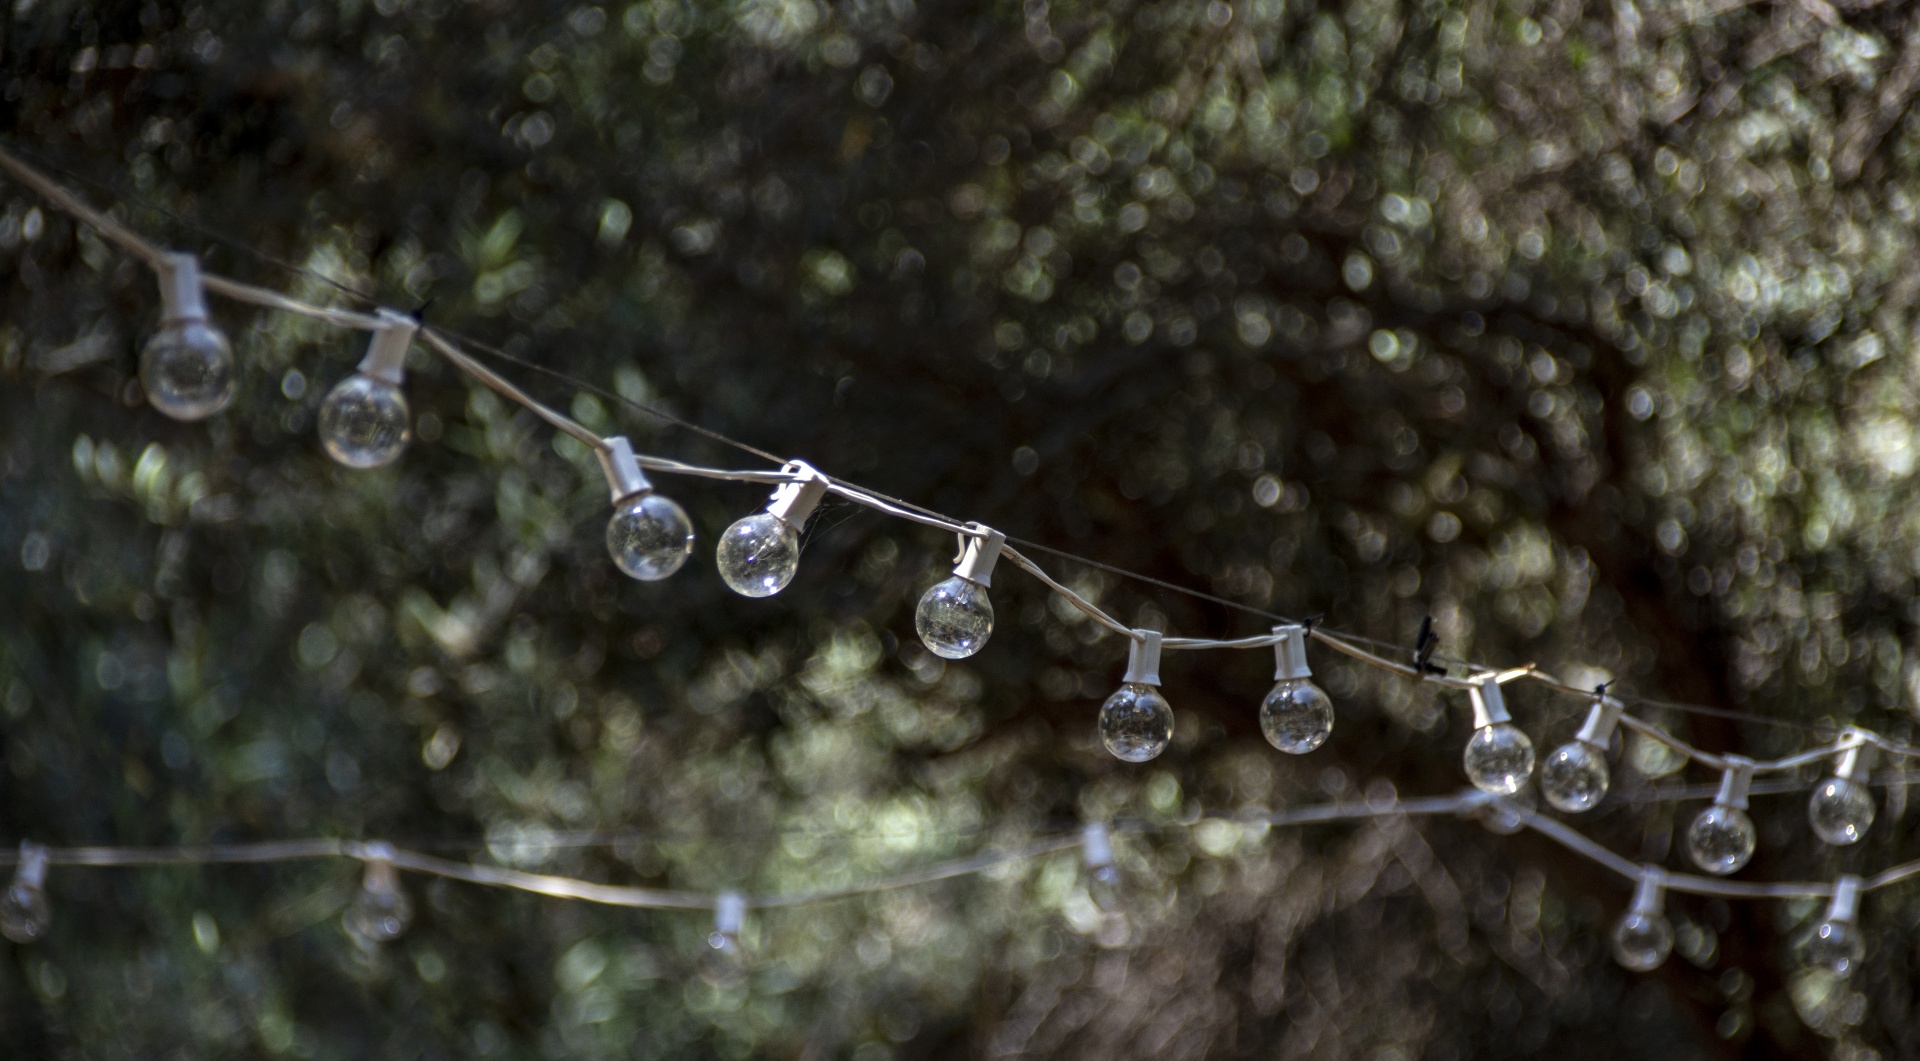 round patio lights strung between trees